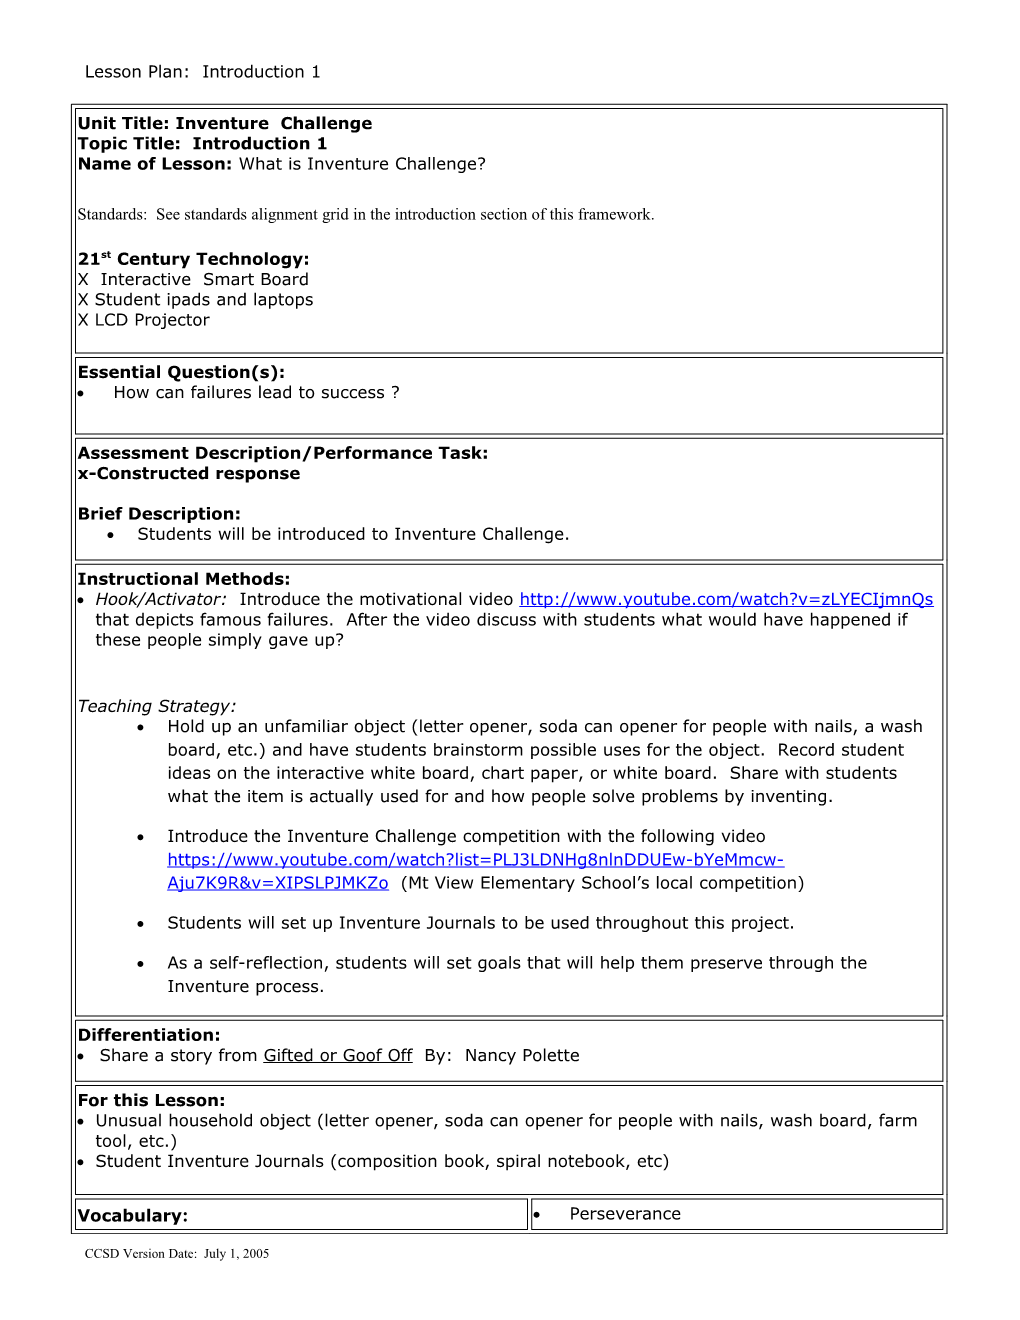 Lesson Plan Template Gifted Endorsement Class